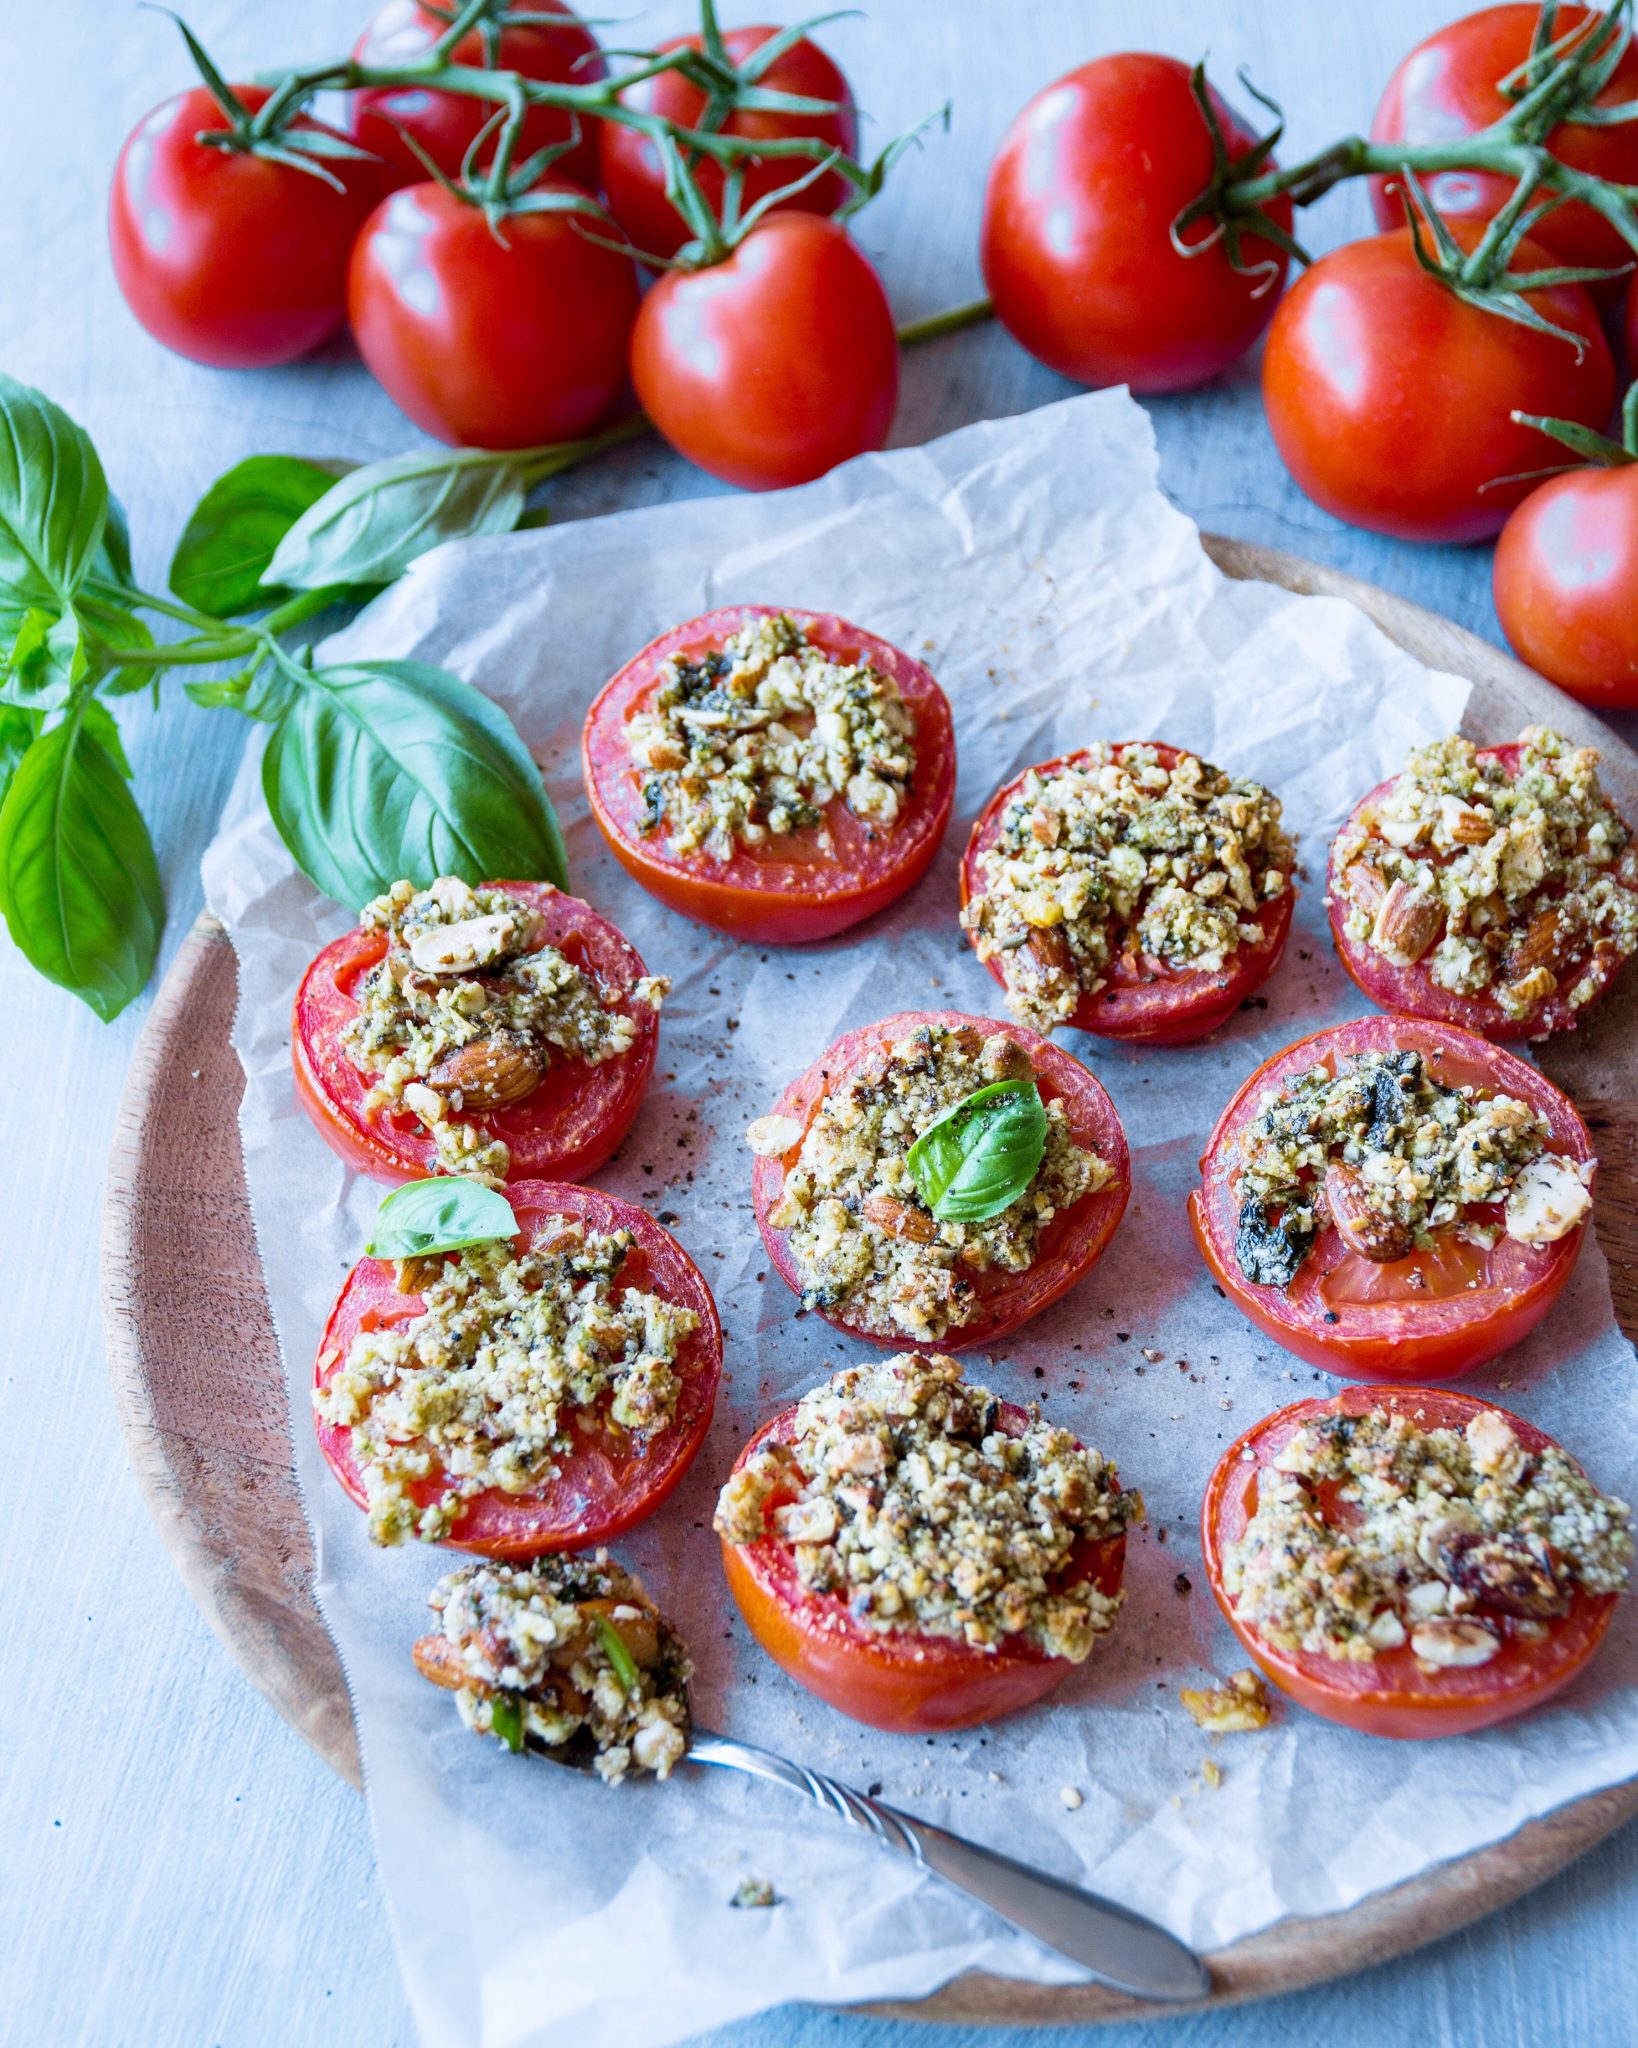 Roasted Tomatoes with Almond Basil Crust